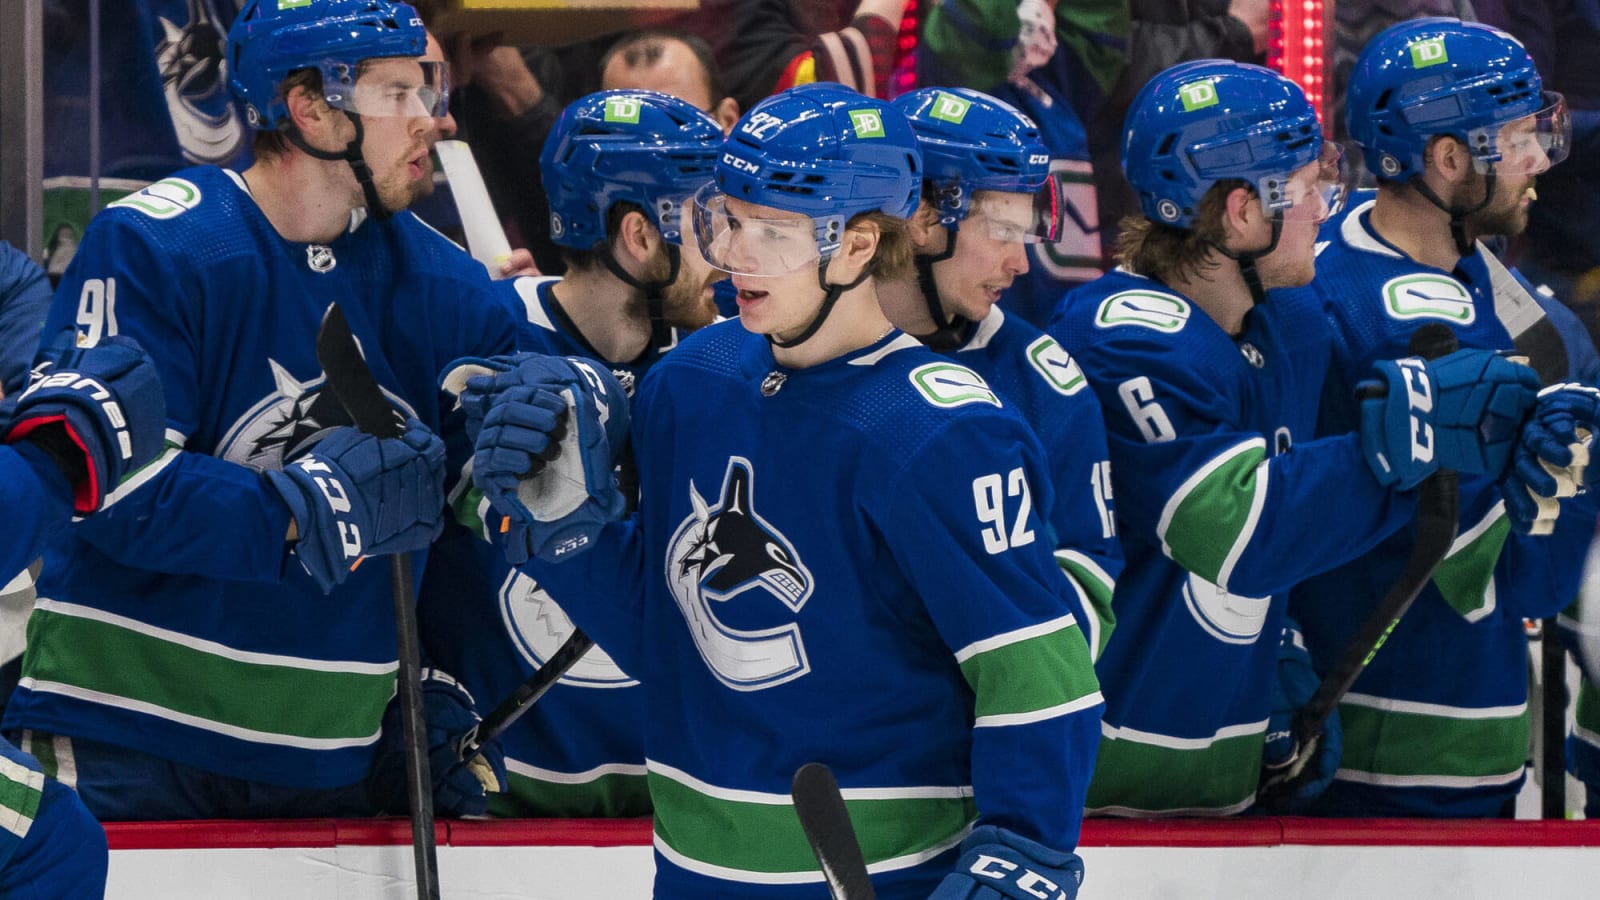 CanucksArmy post game: Miller, Motte, Lammikko, and Pettersson record multiple points as Canucks defeat Kraken